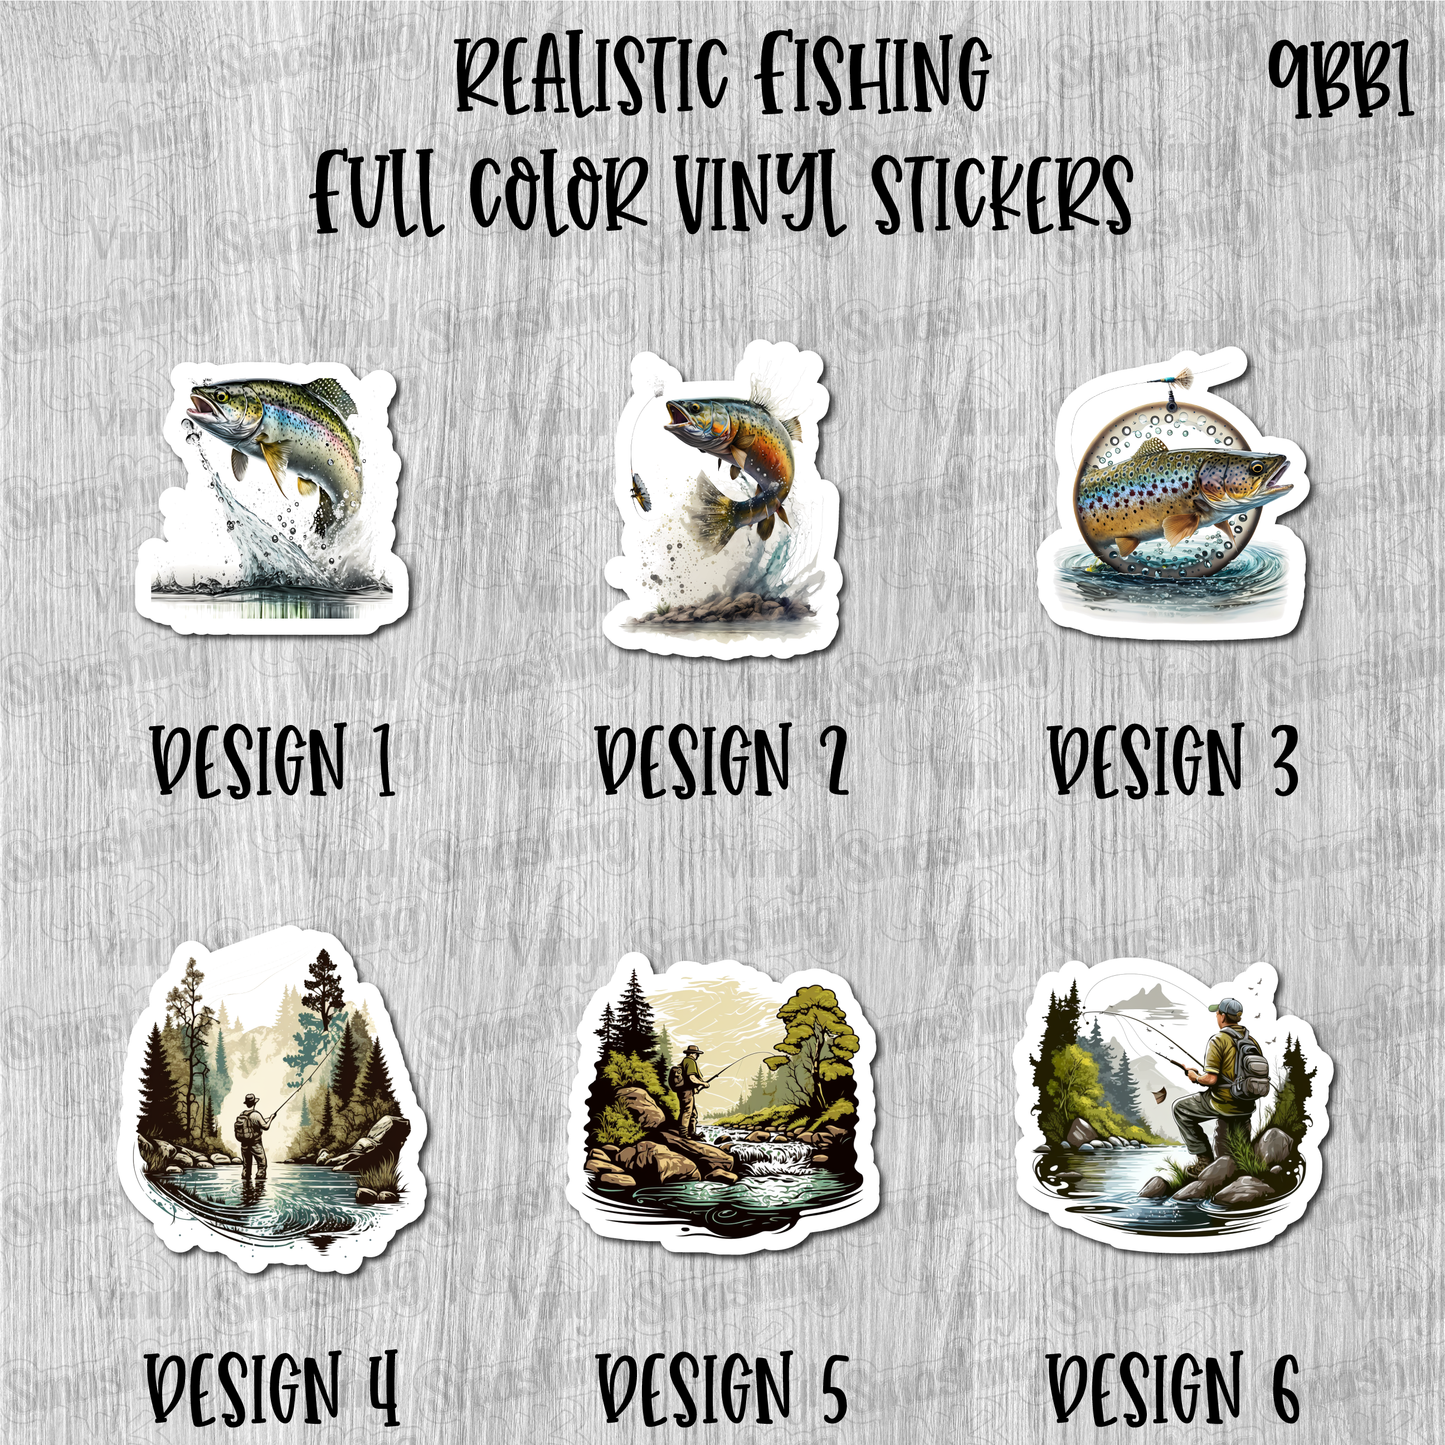 Realistic Fishing - Full Color Vinyl Stickers (SHIPS IN 3-7 BUS DAYS)